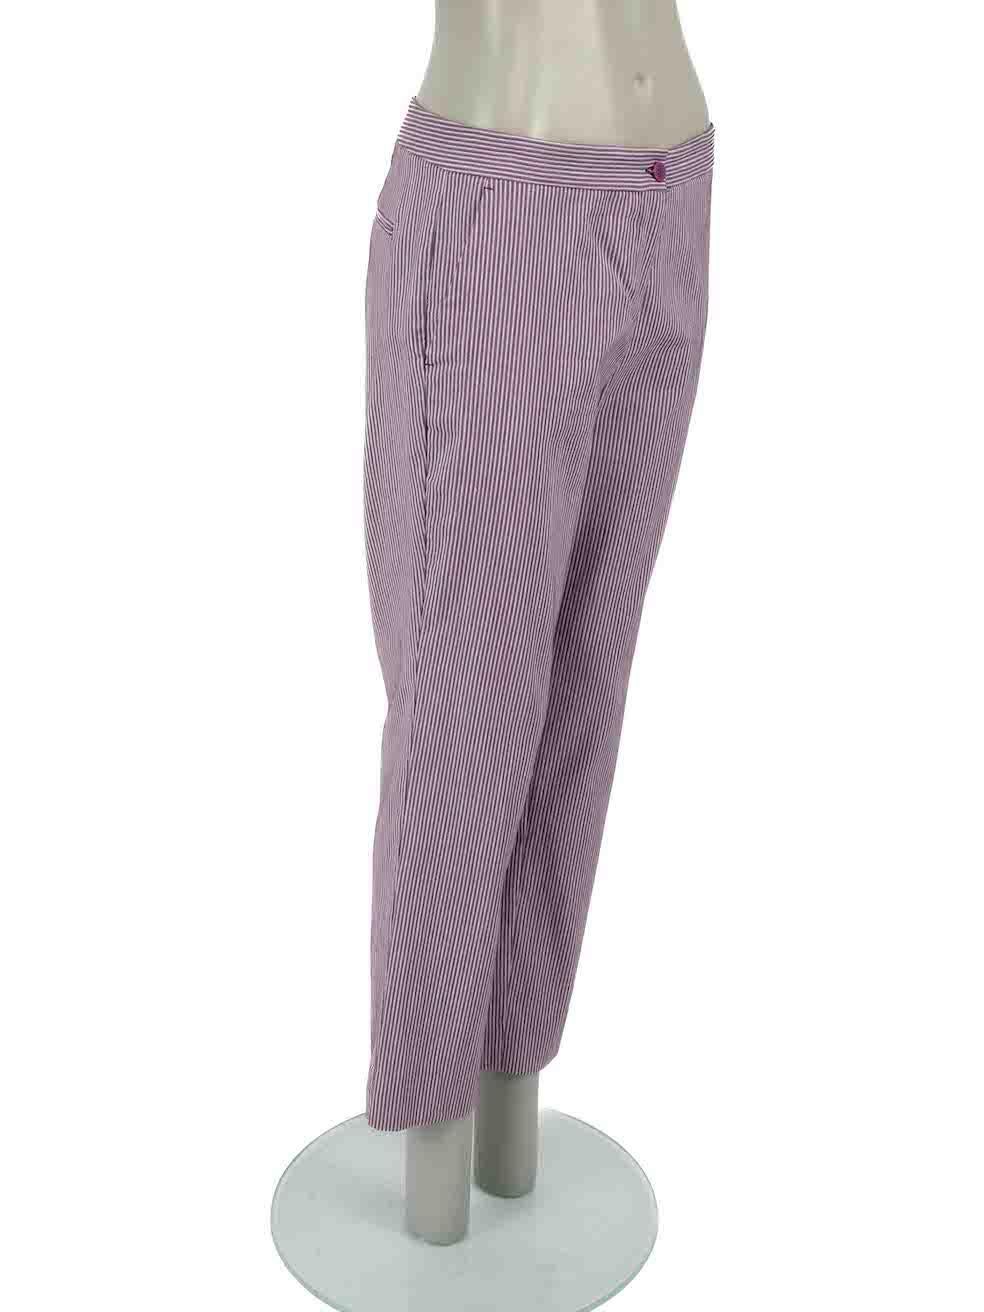 CONDITION is Very good. Hardly any visible wear to trousers is evident on this used Etro designer resale item.
 
Details
Purple
Cotton
Slim fit trousers
Cropped length
Mid rise
Front zip closure with button
2x Front side pockets
2x Back